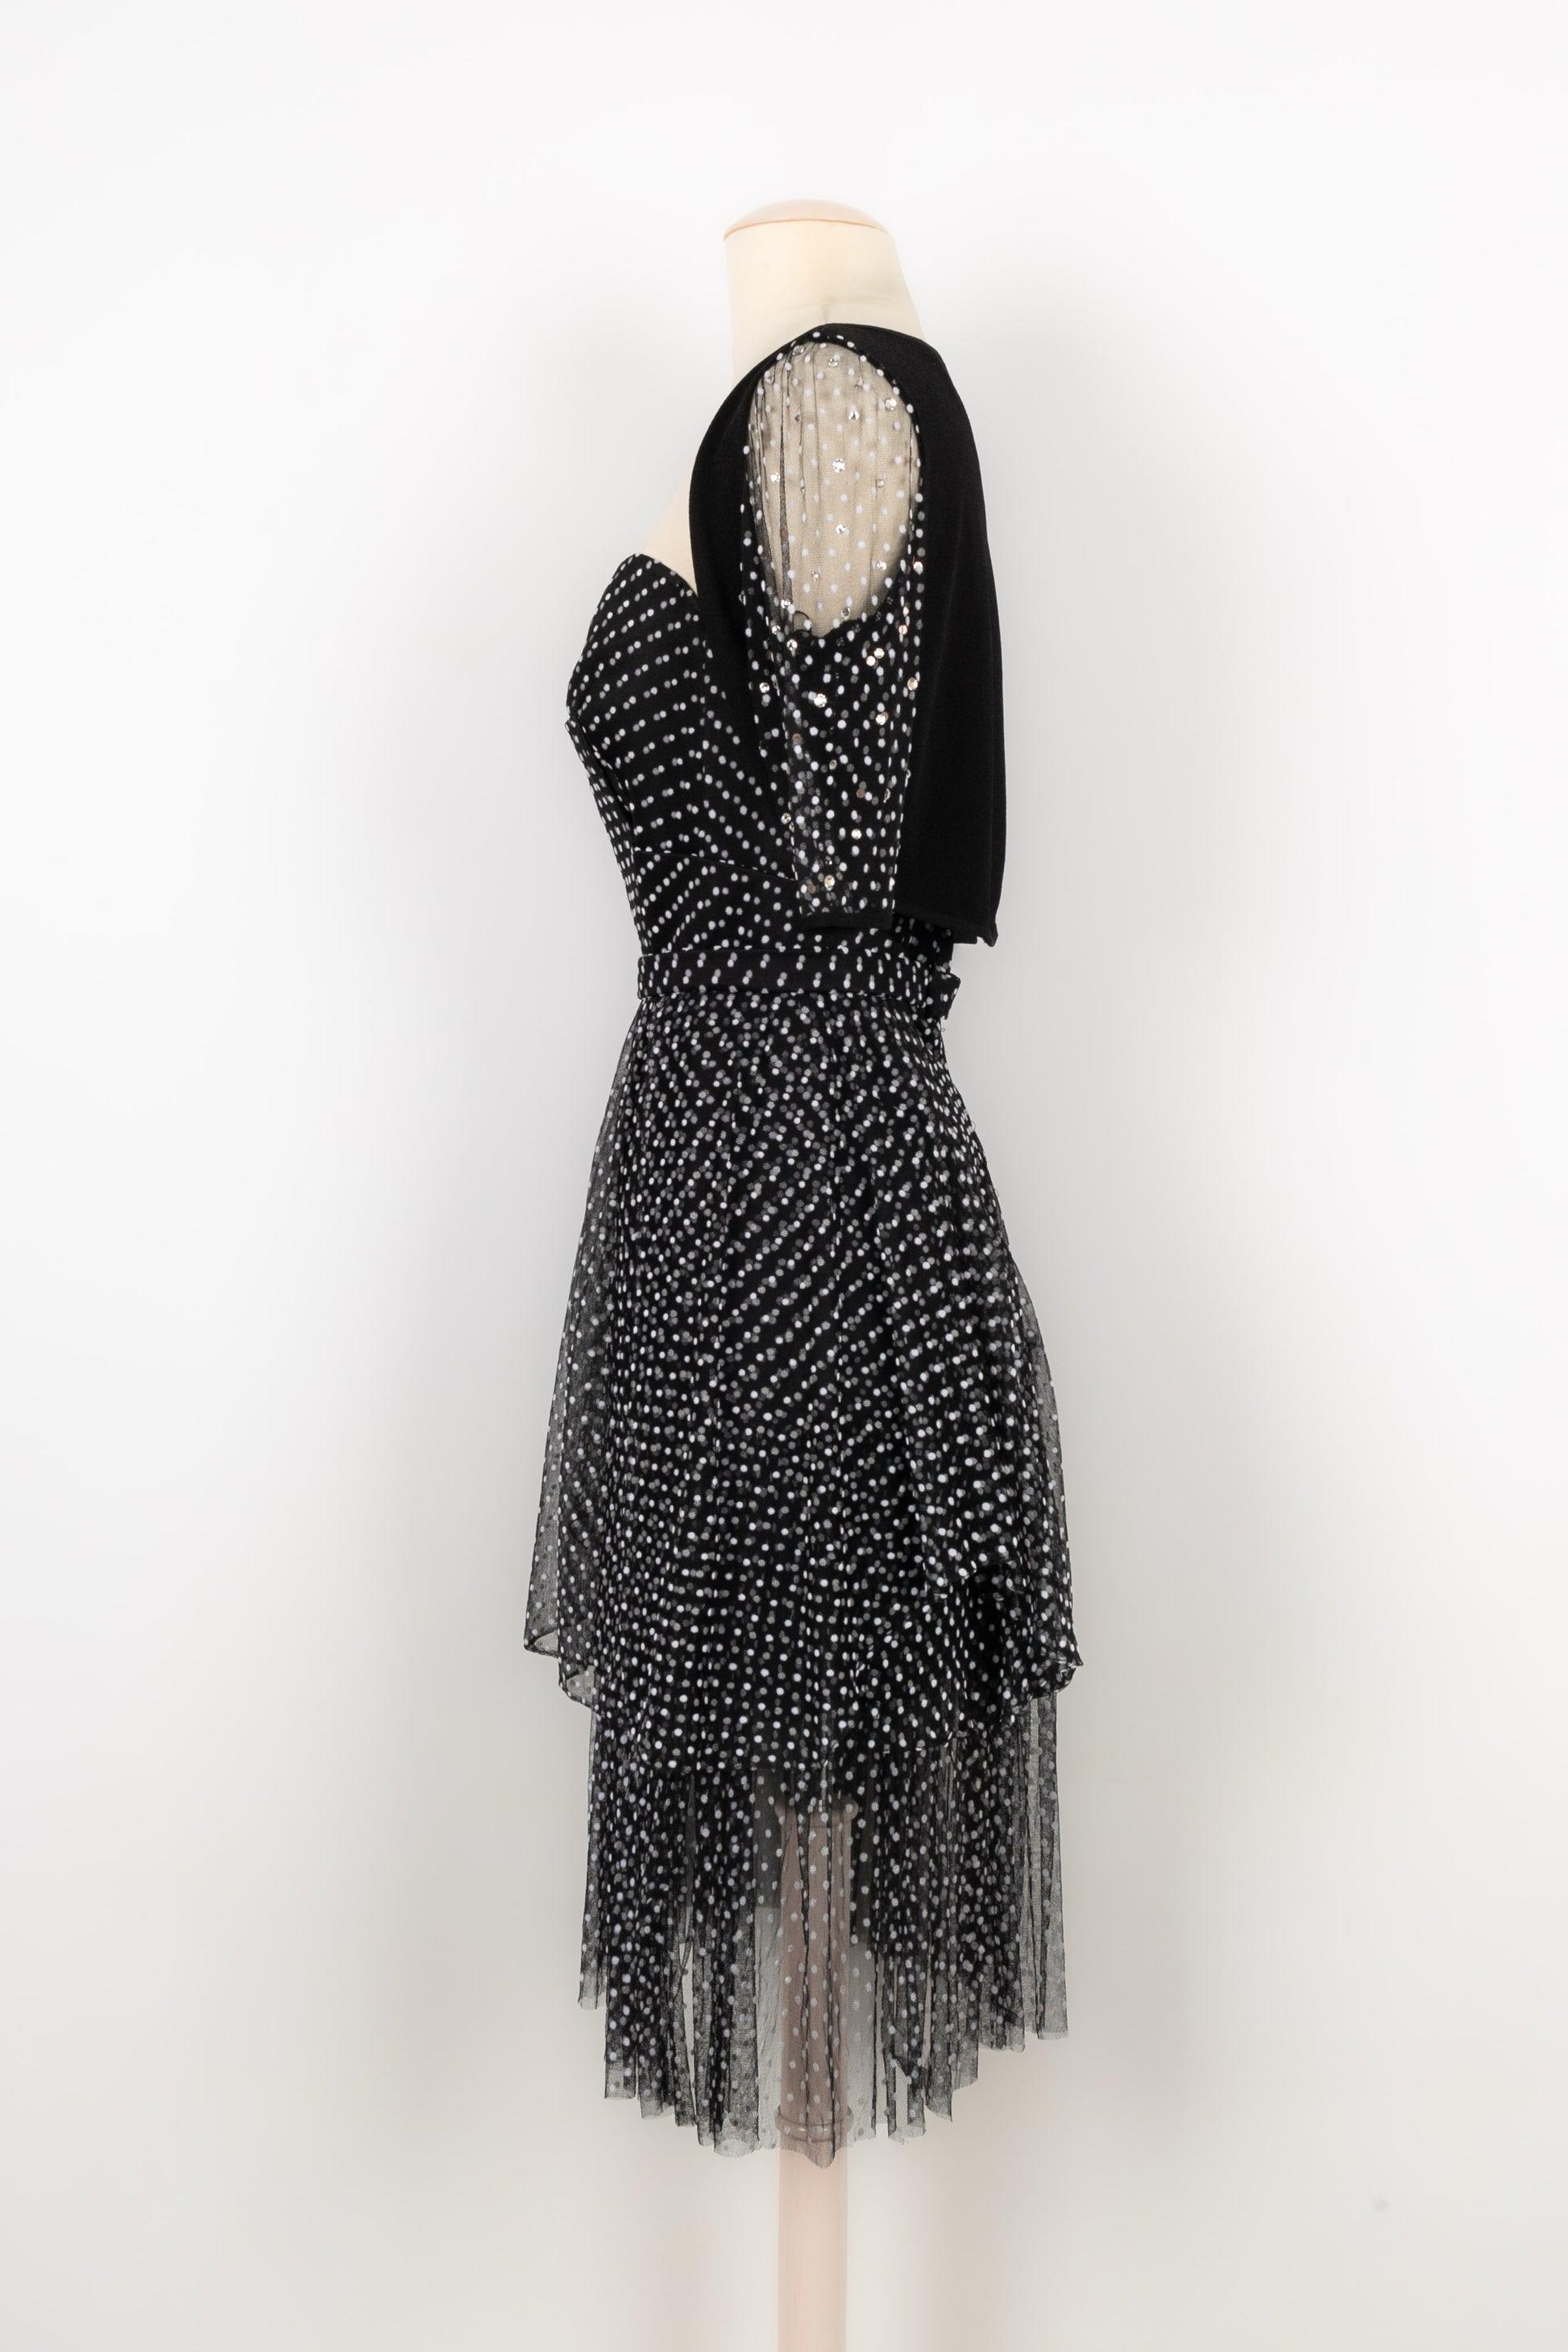 Christian Lacroix Set Composed of a Dress and a Bolero in Polka Dot, 1990s In Excellent Condition For Sale In SAINT-OUEN-SUR-SEINE, FR